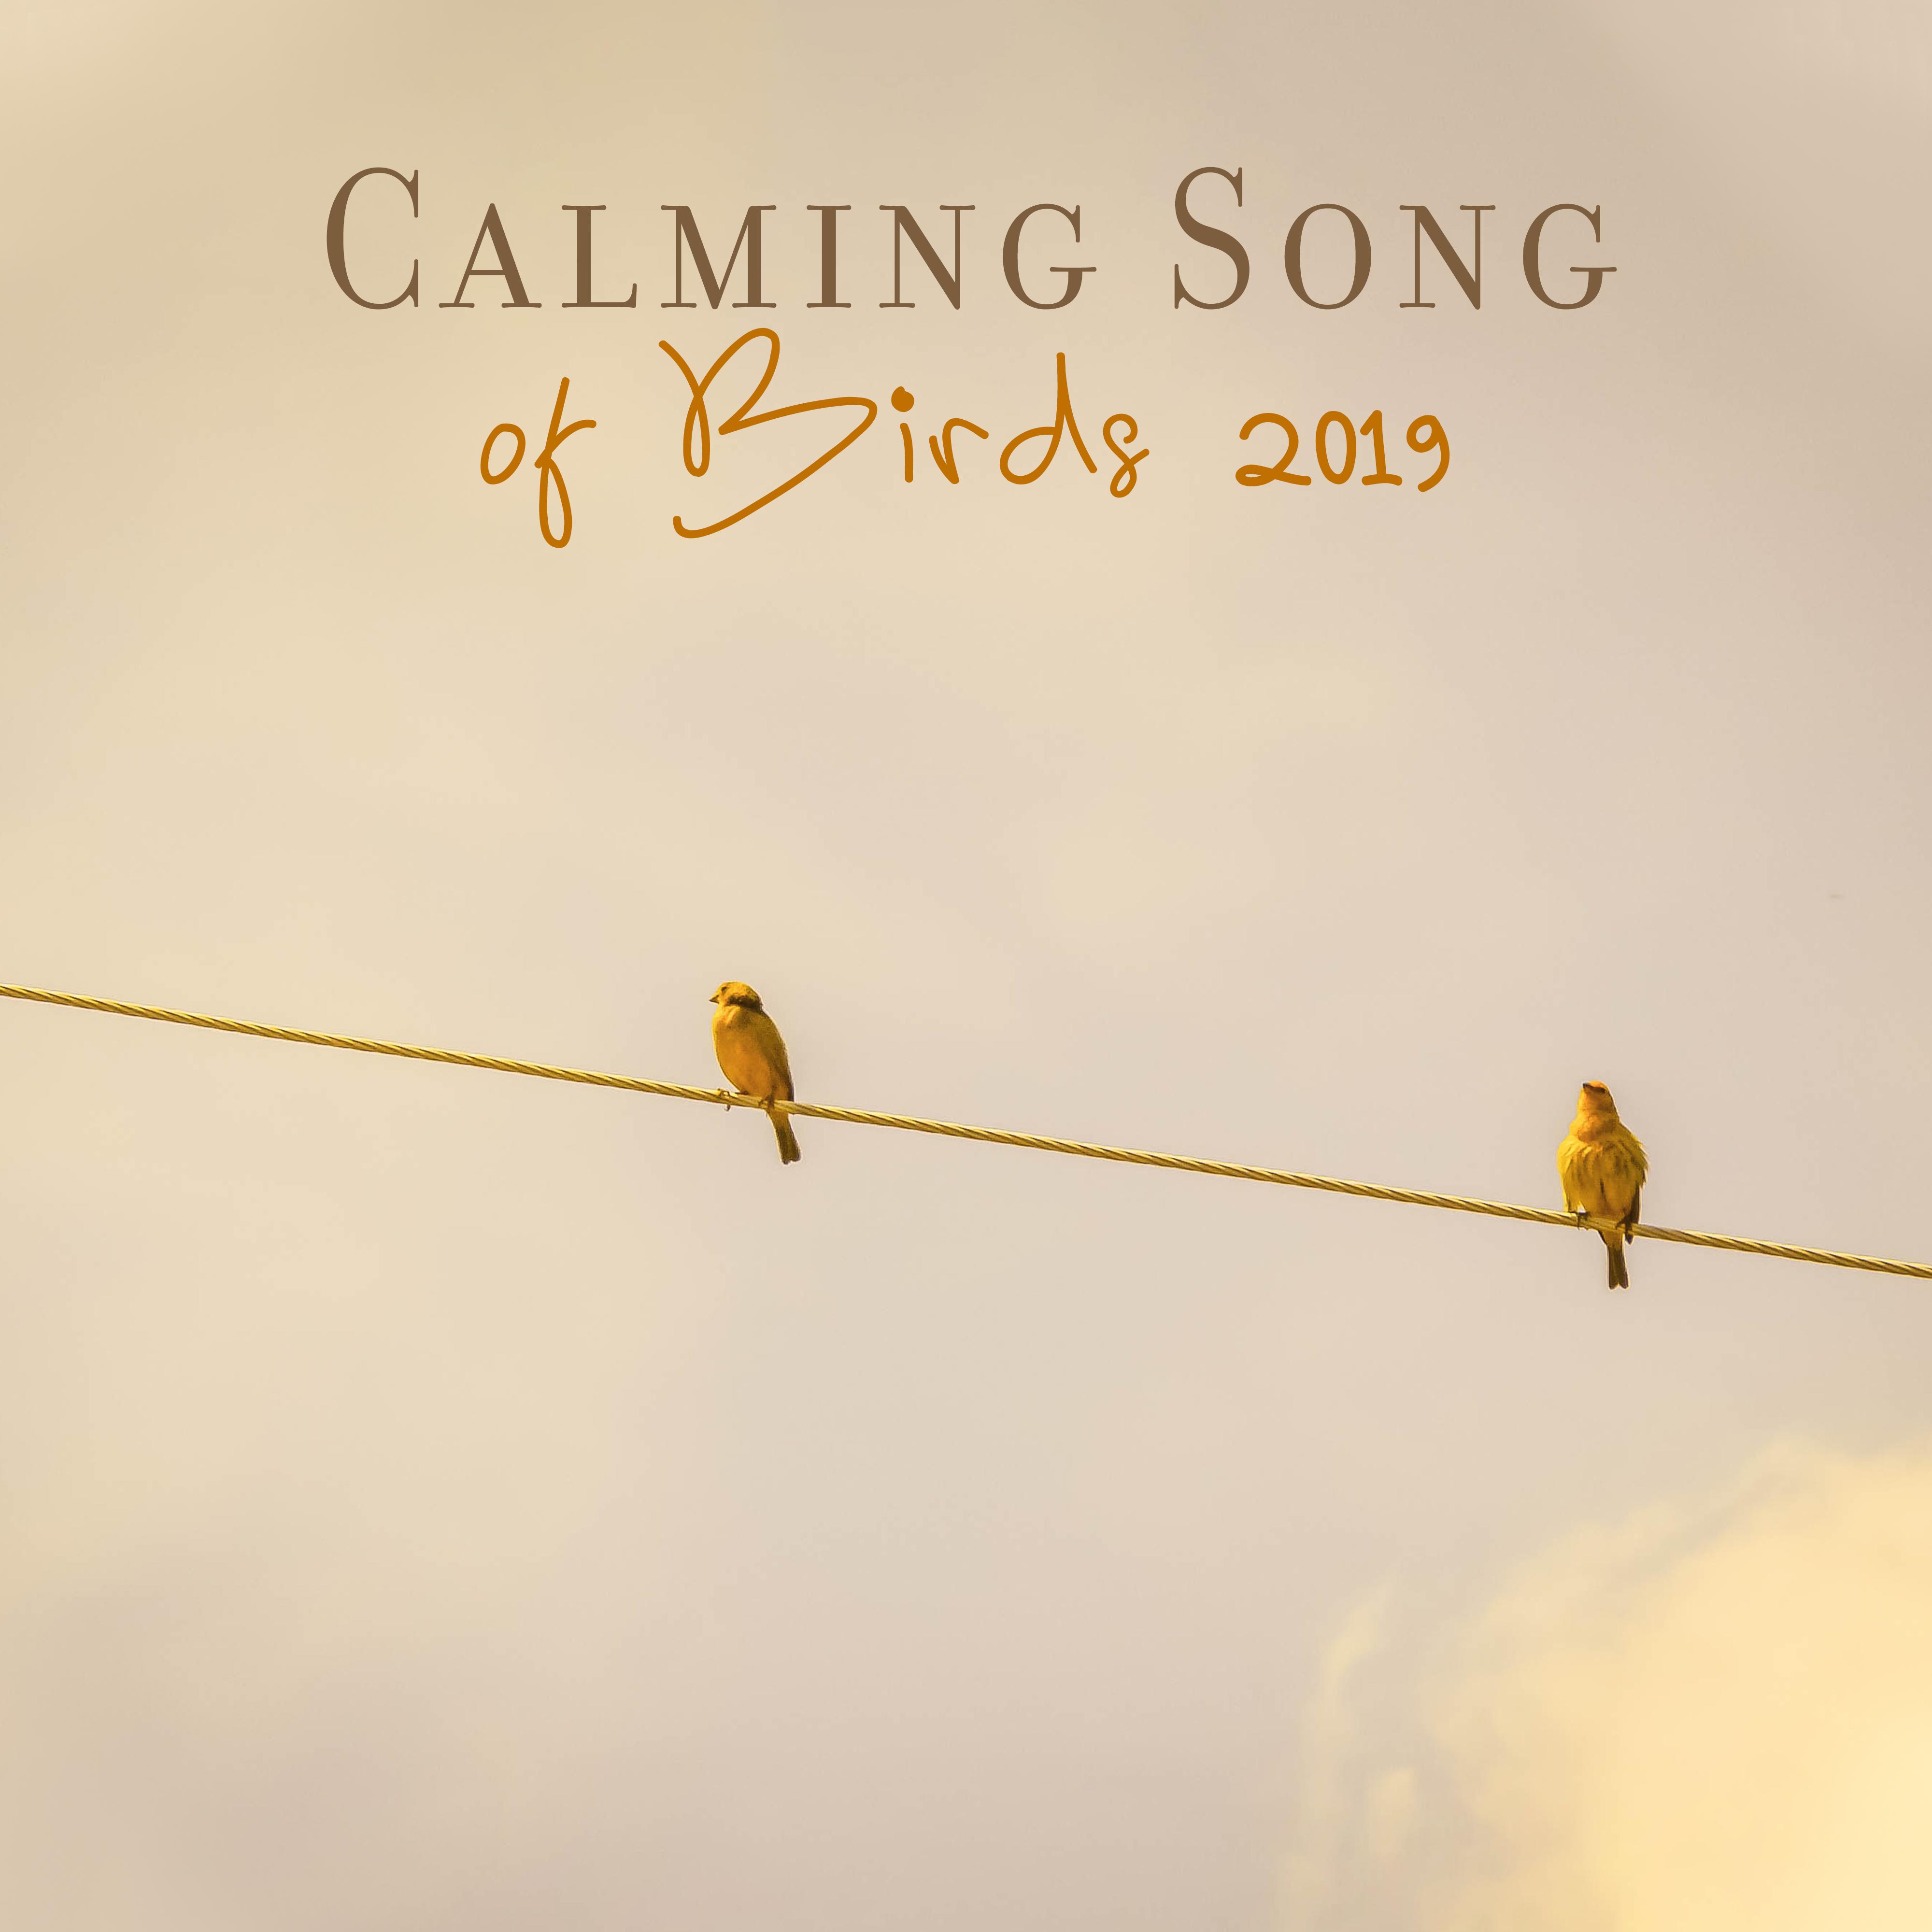 Calming Songs of Birds 2019: Compilation of 15 New Age Nature Songs, Sounds of Various Species of Birds with Piano Melodies, Music Perfect for Calming Down, Stress Reduce, Relax After Tough Day